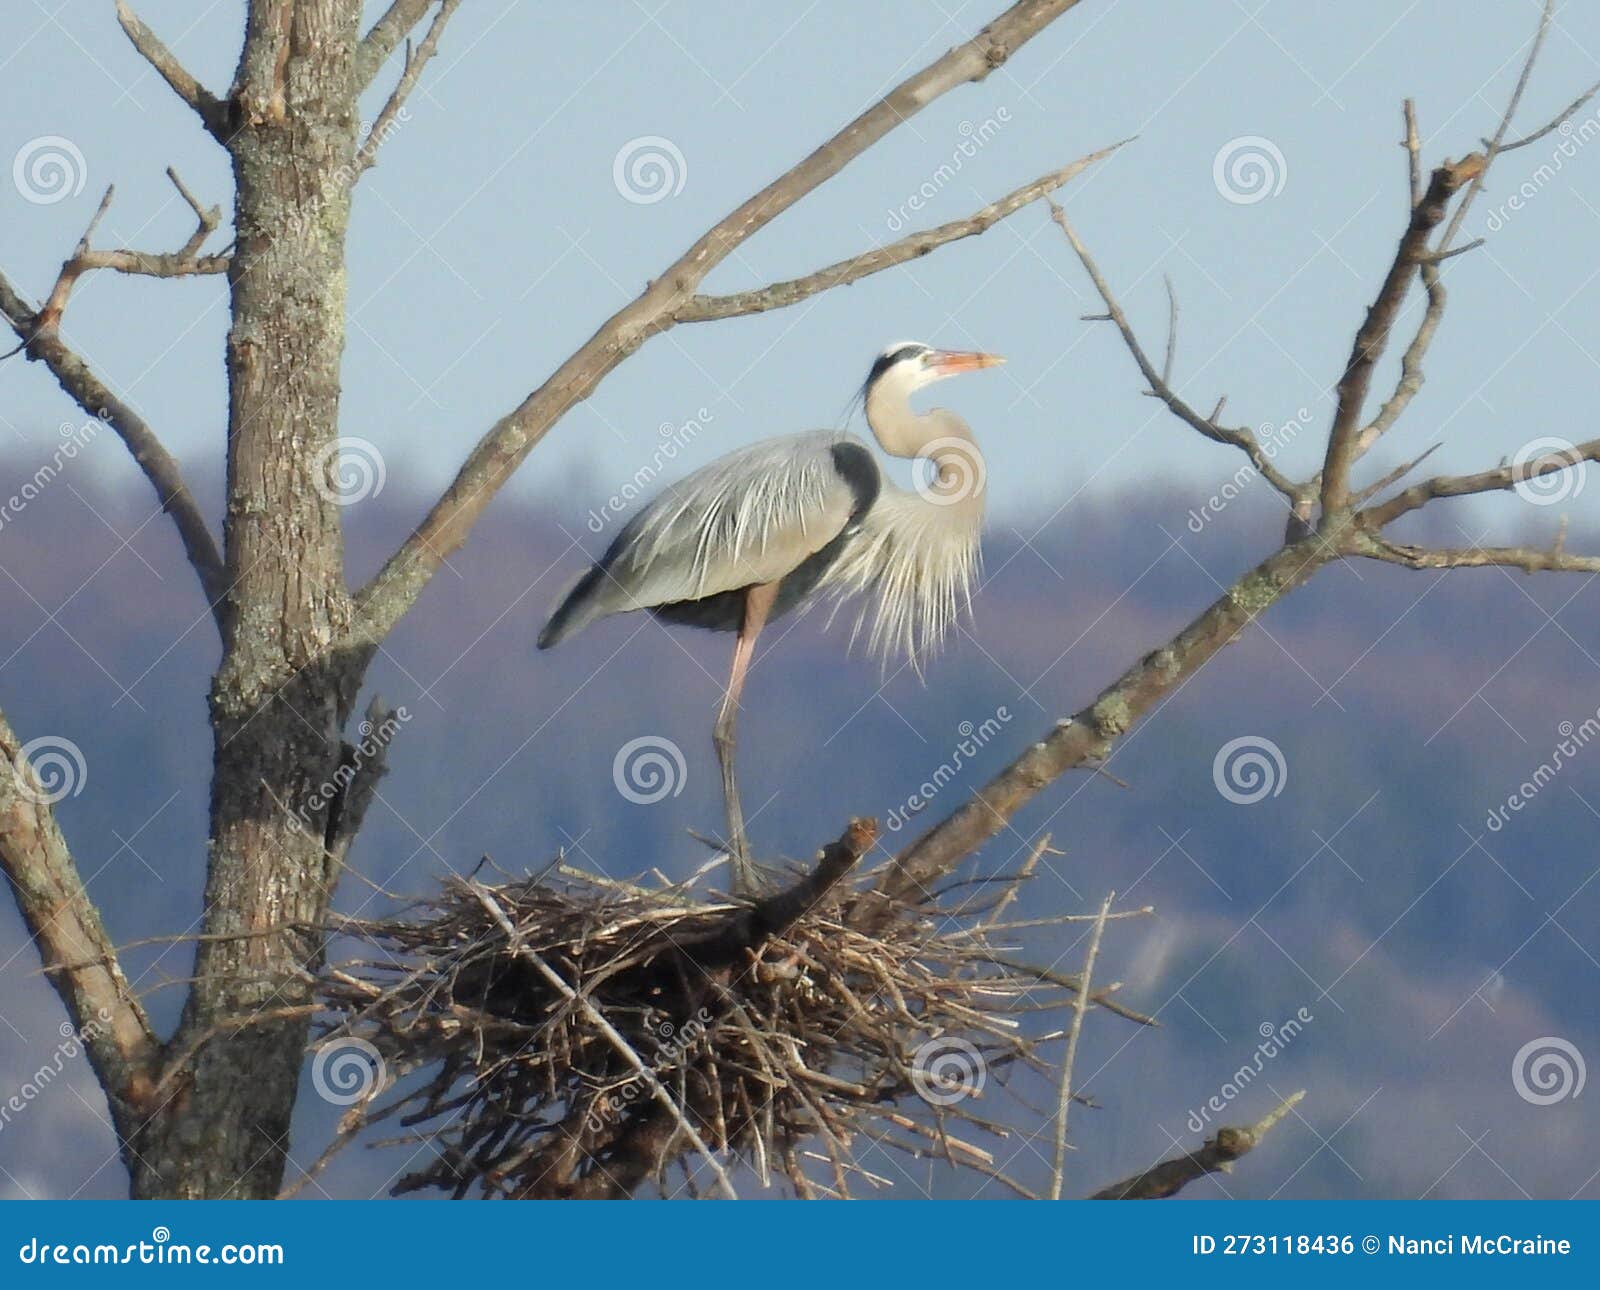 great blue heron stands proudly on new spring nest